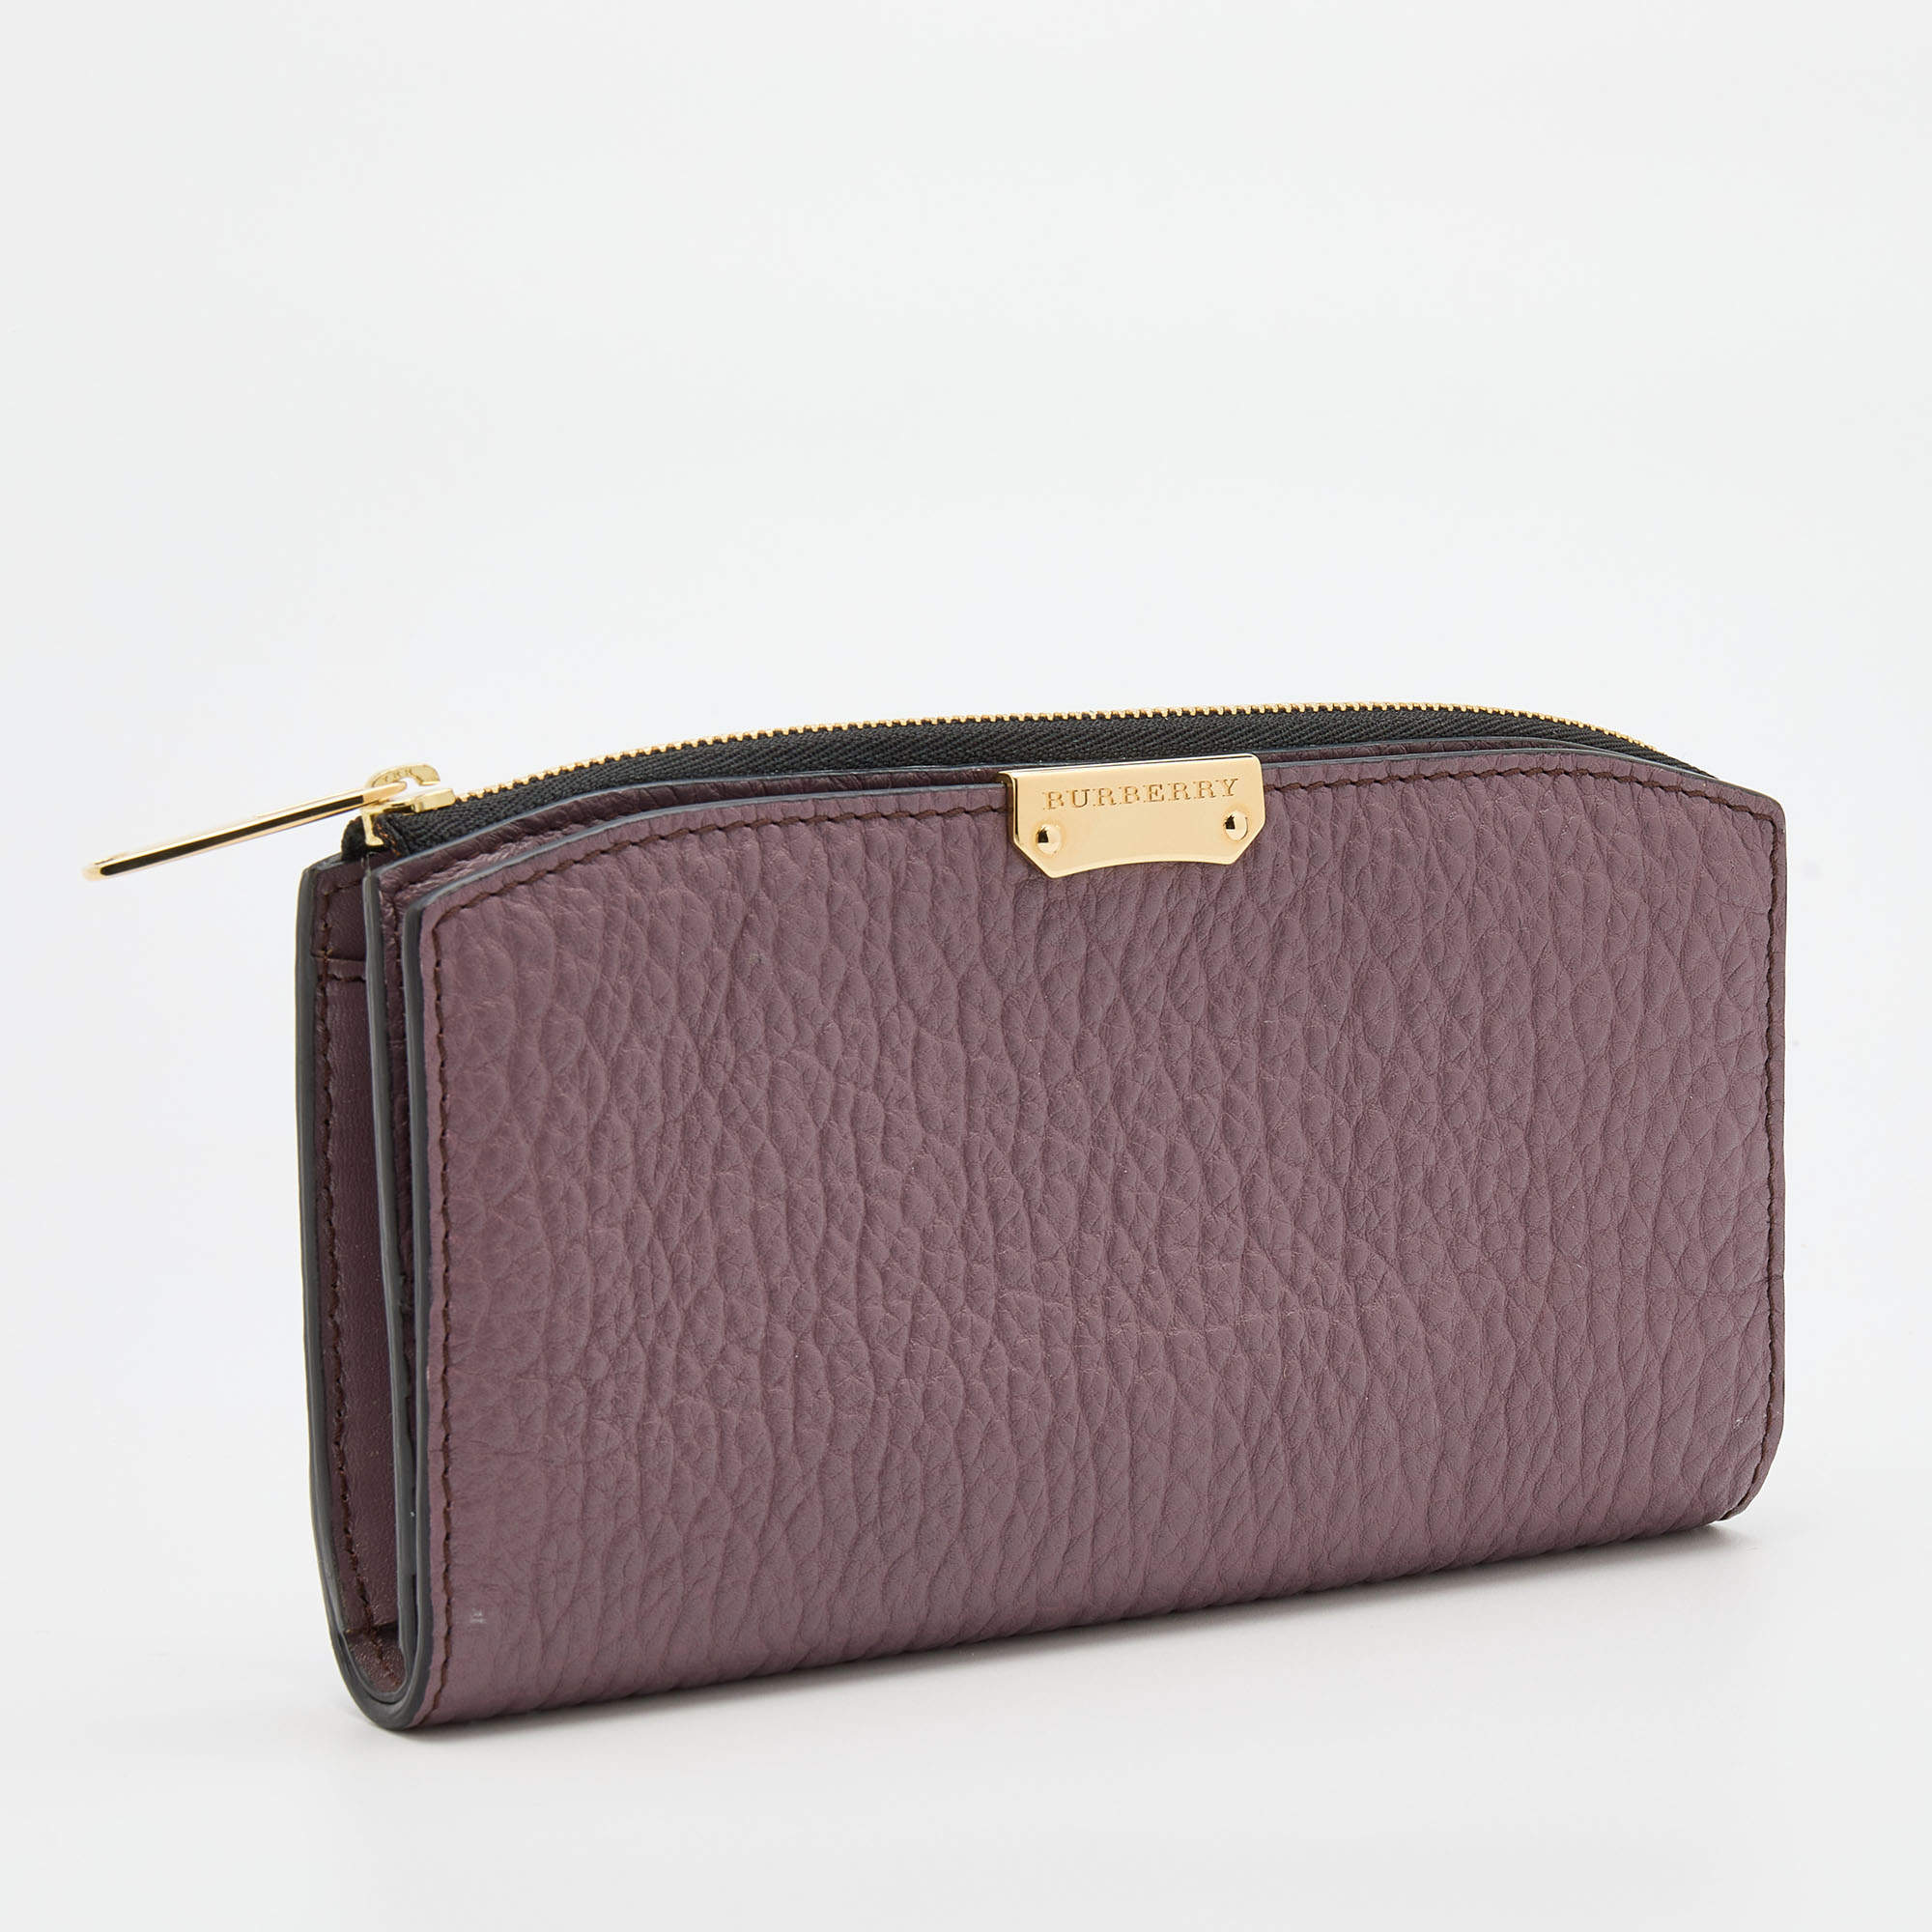 Burberry Purple Textured Leather Zip Around Compact Wallet Burberry | TLC